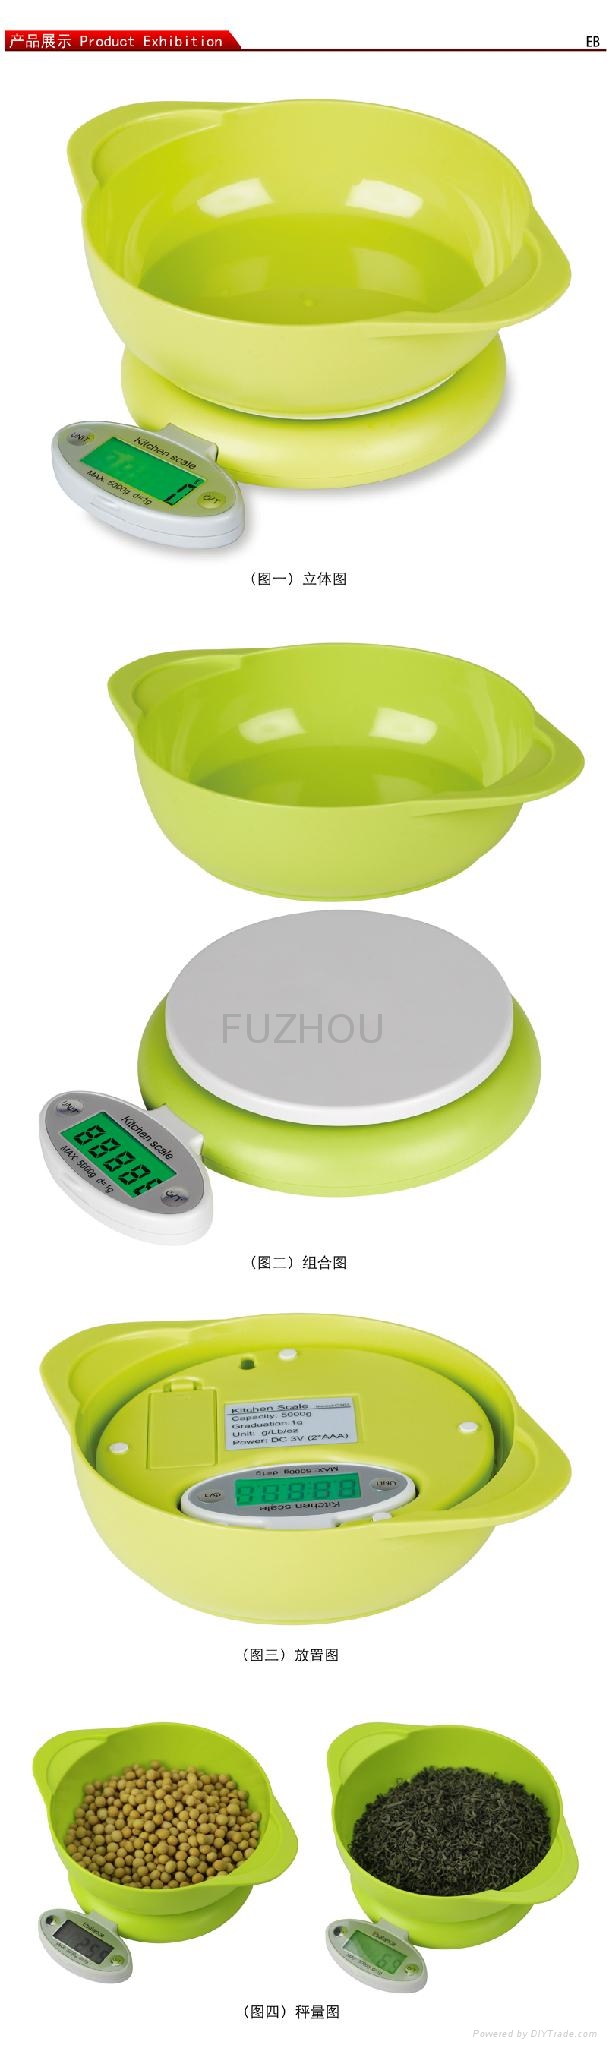 Digital kitchen scale with measuring bowl